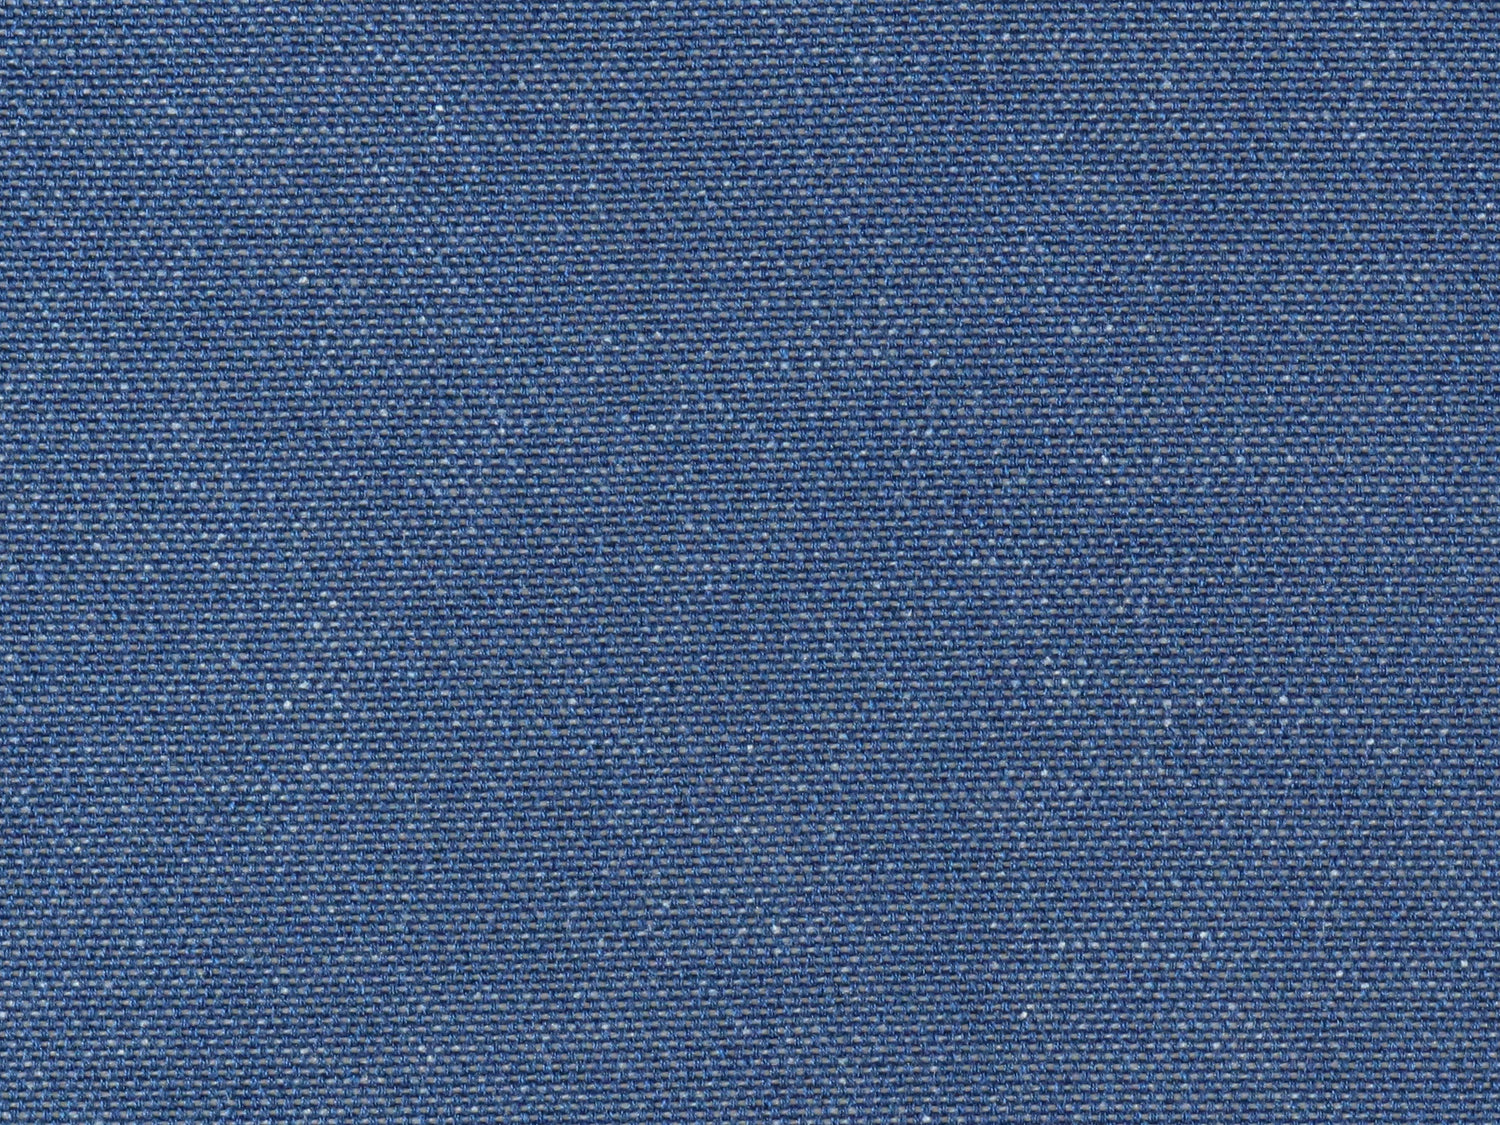 Valverde fabric in marine color - pattern number L6 0009VALV - by Scalamandre in the Old World Weavers collection